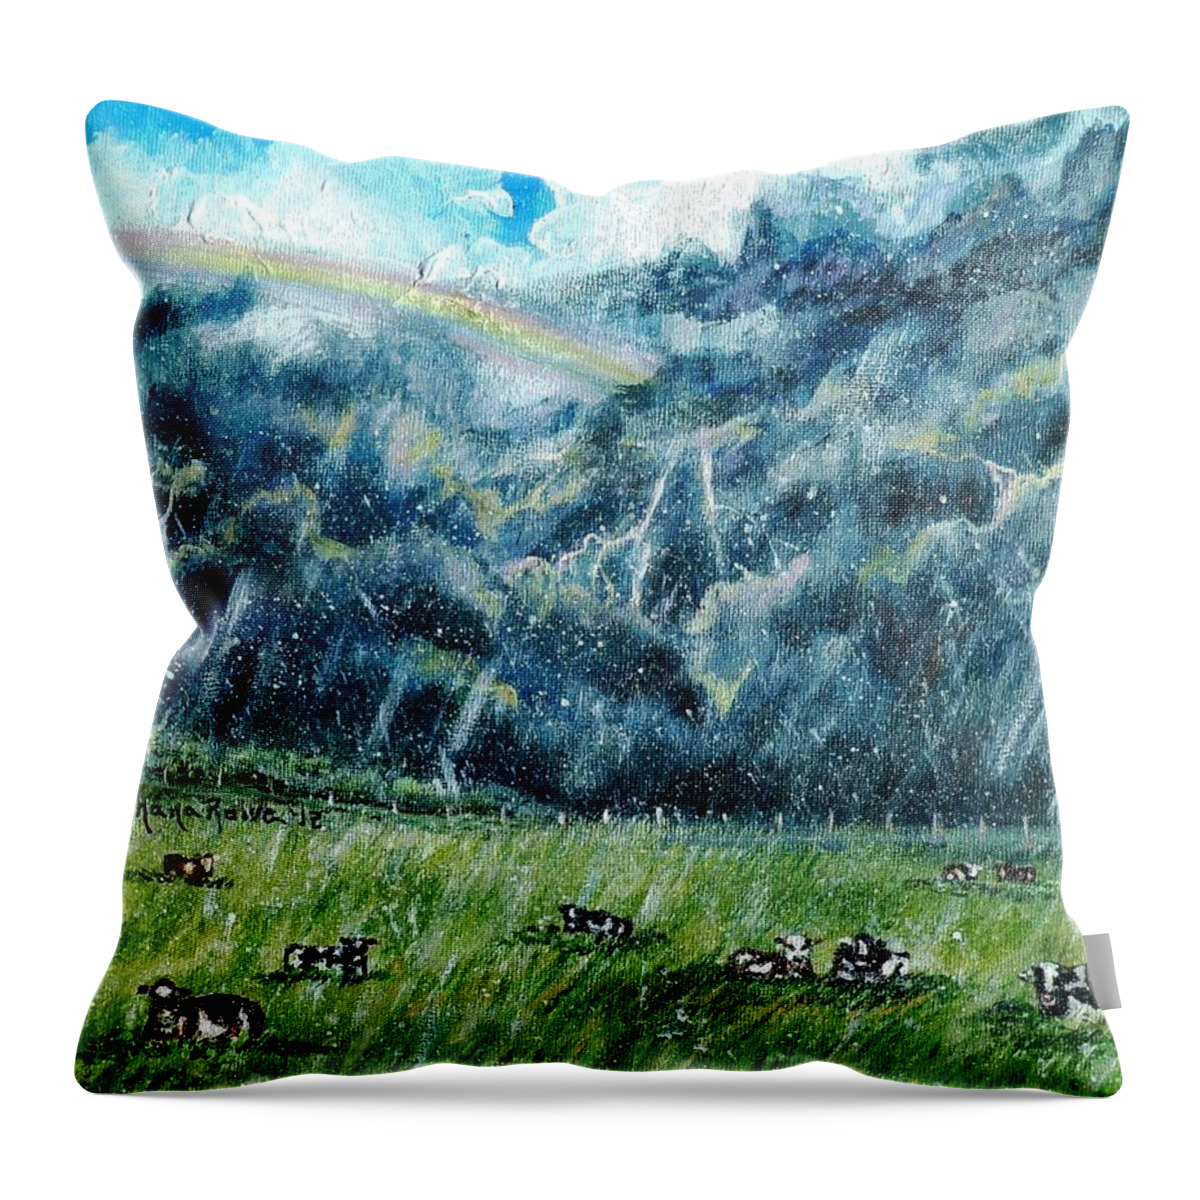 Storm Throw Pillow featuring the painting Summer Storm by Shana Rowe Jackson